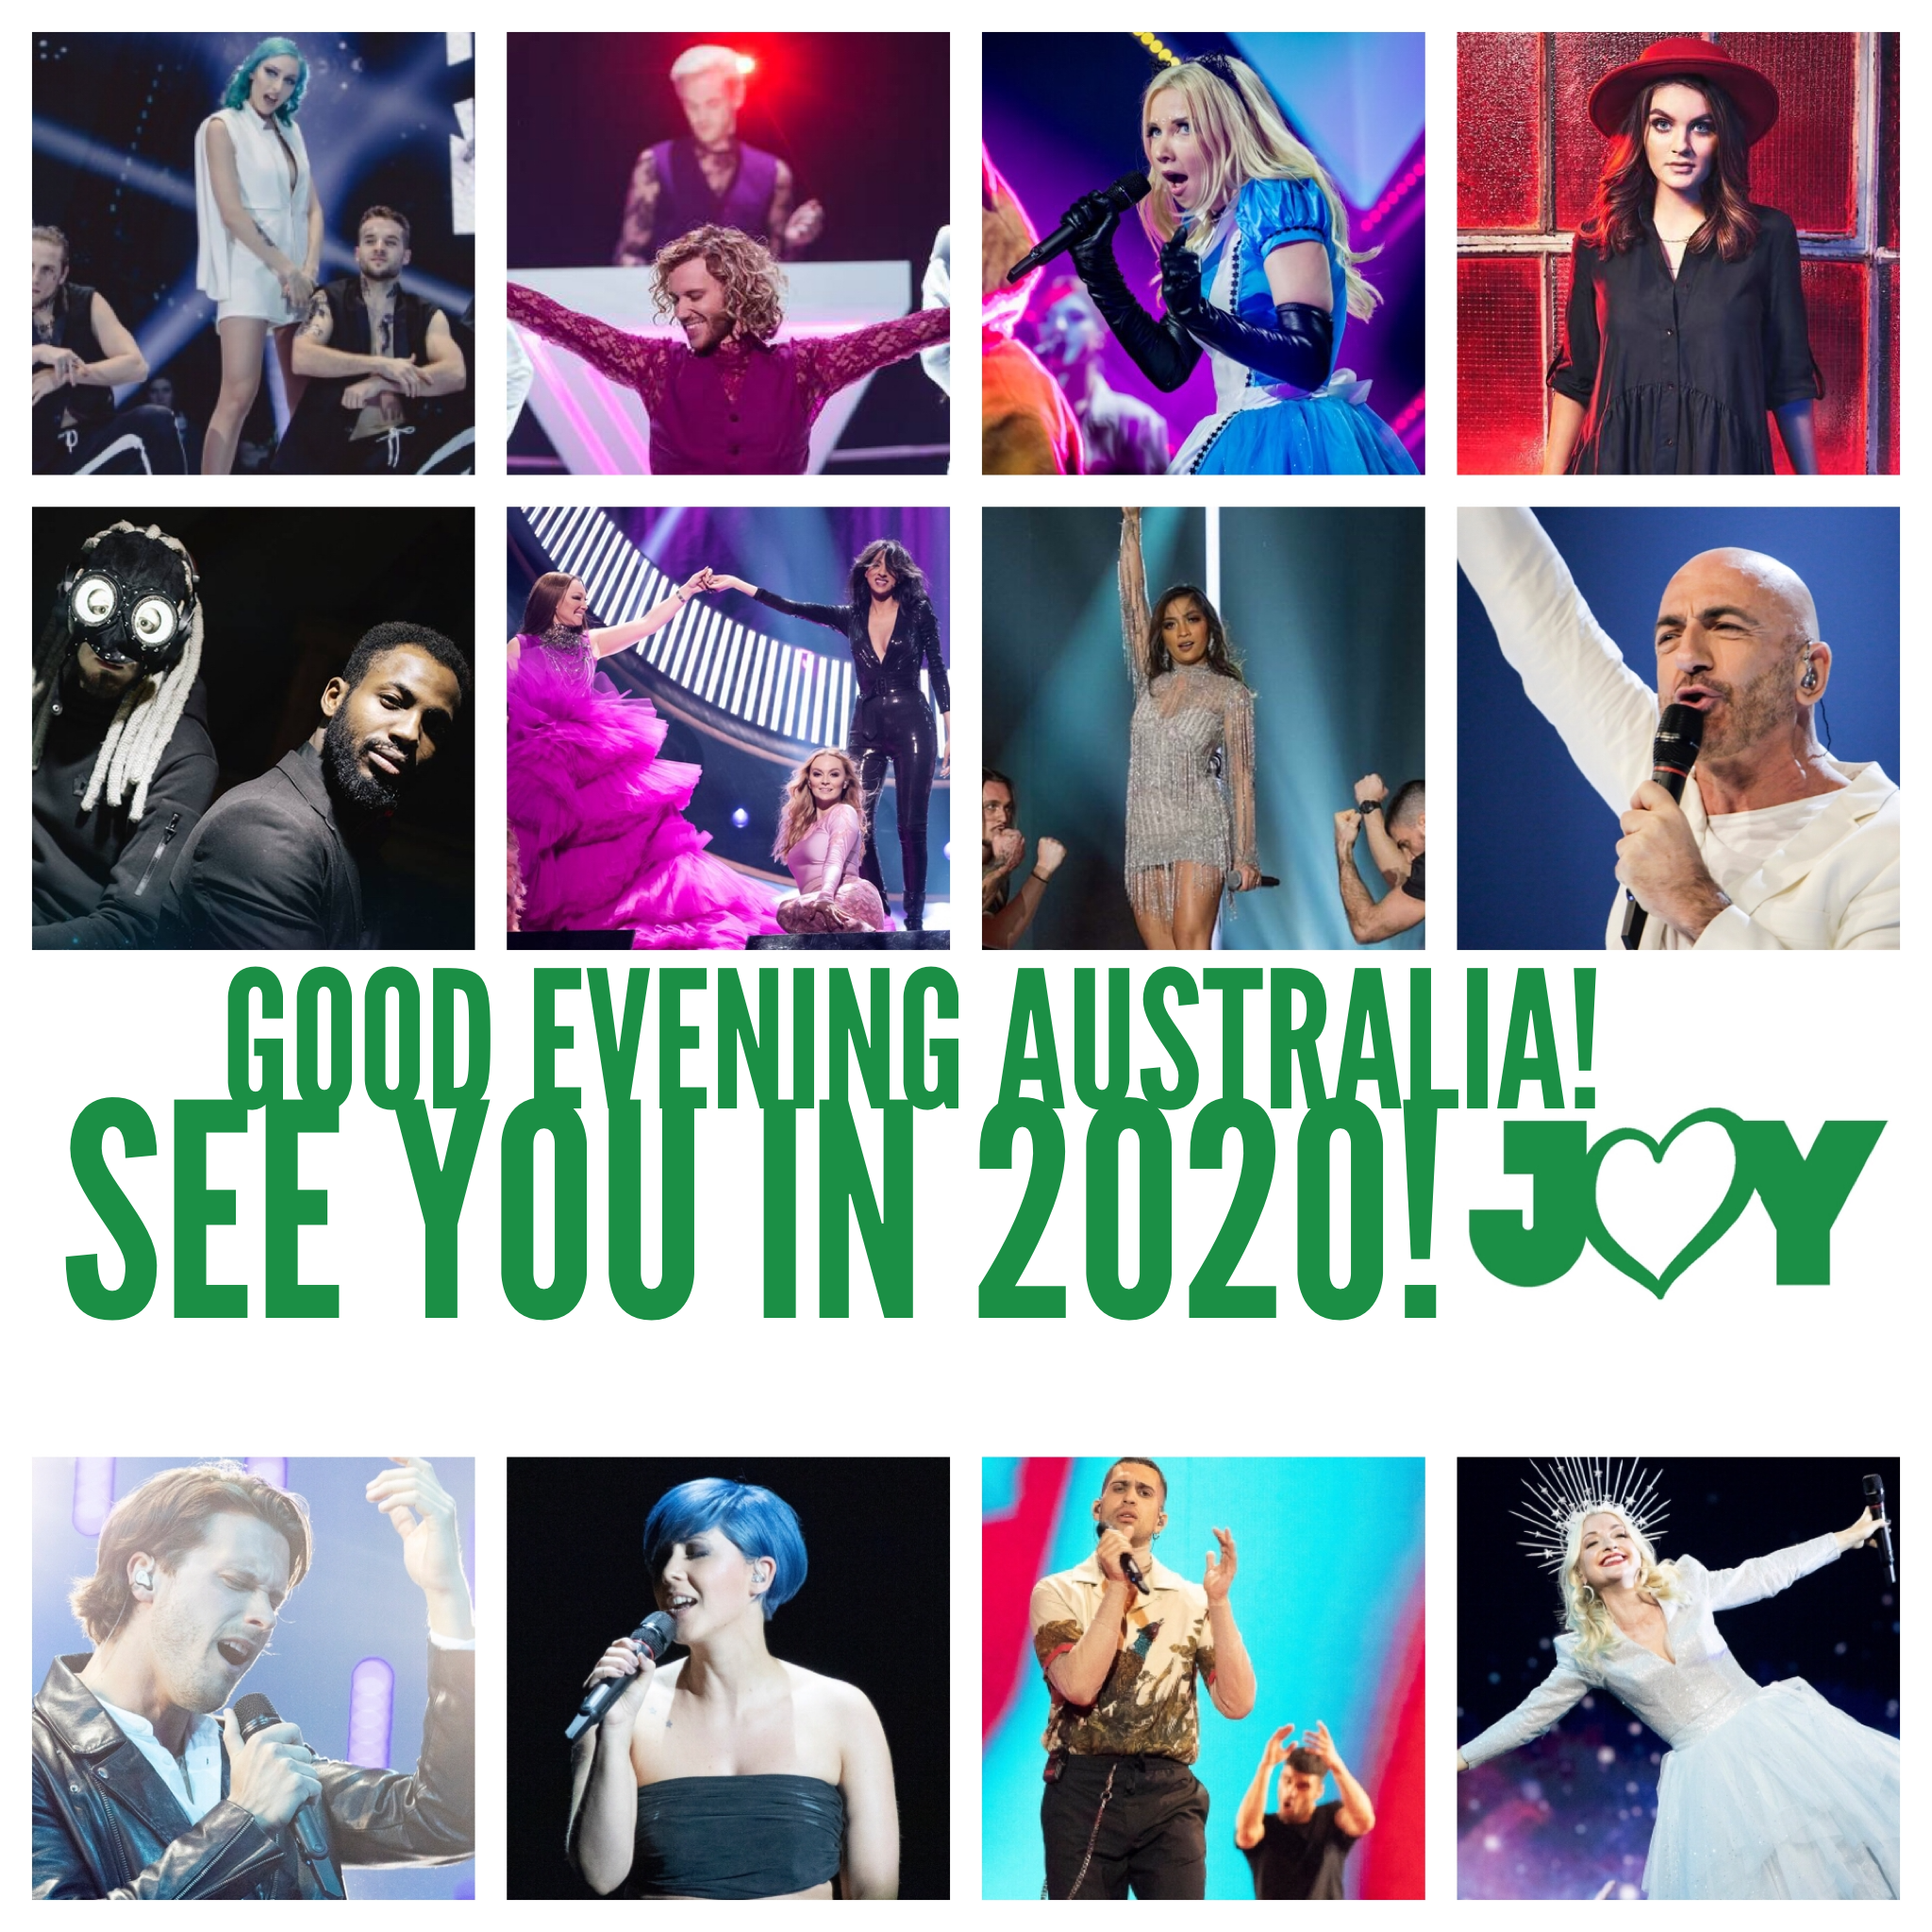 Good evening Australia! See you in the Netherlands next year!